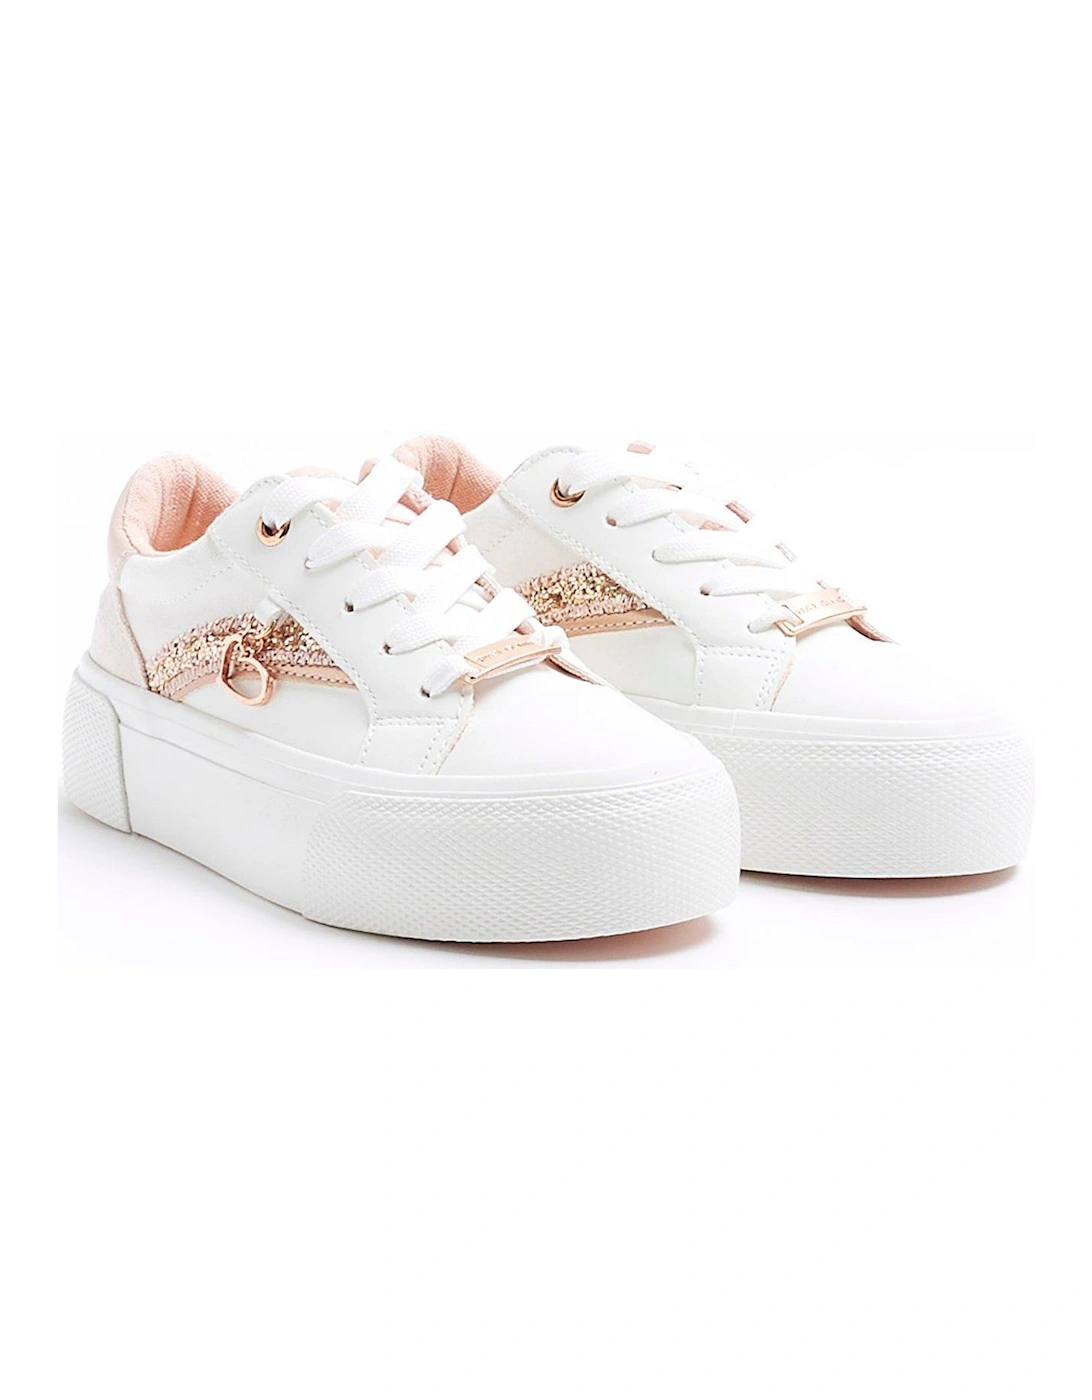 Girls Glitter Lace Up Trainers - Pink